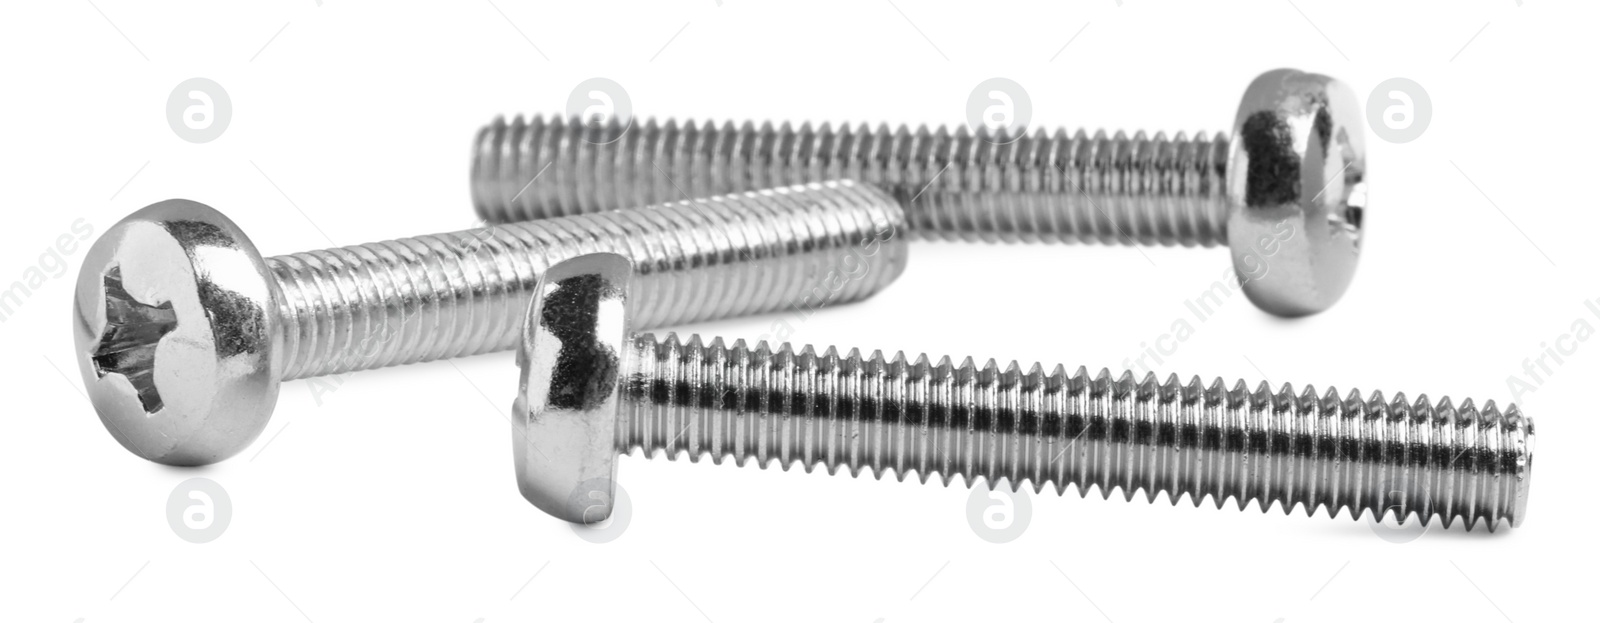 Photo of Three metal machine screw bolts isolated on white